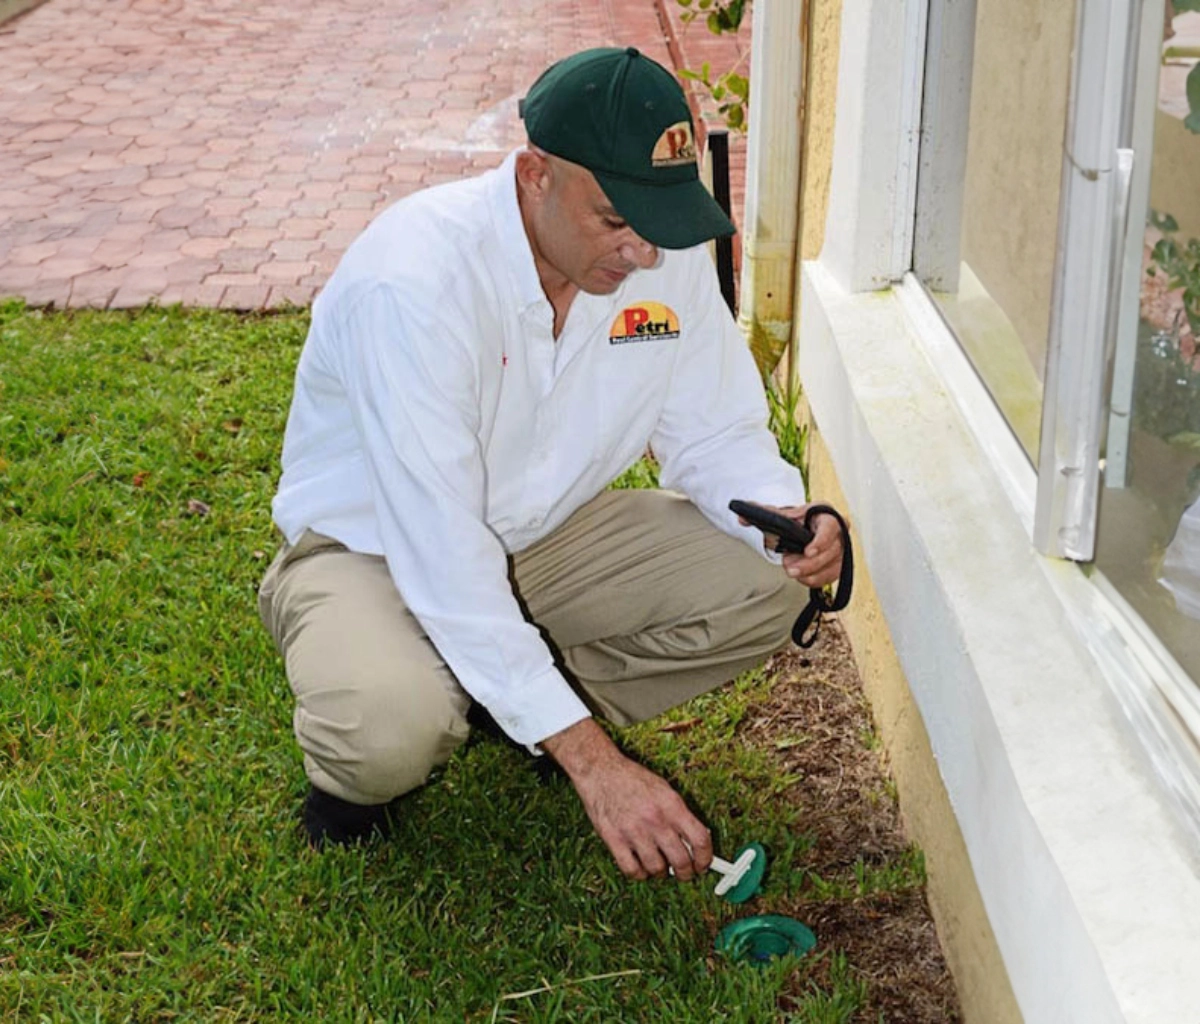 Termite treatment services by Petri Pest Control in South Florida